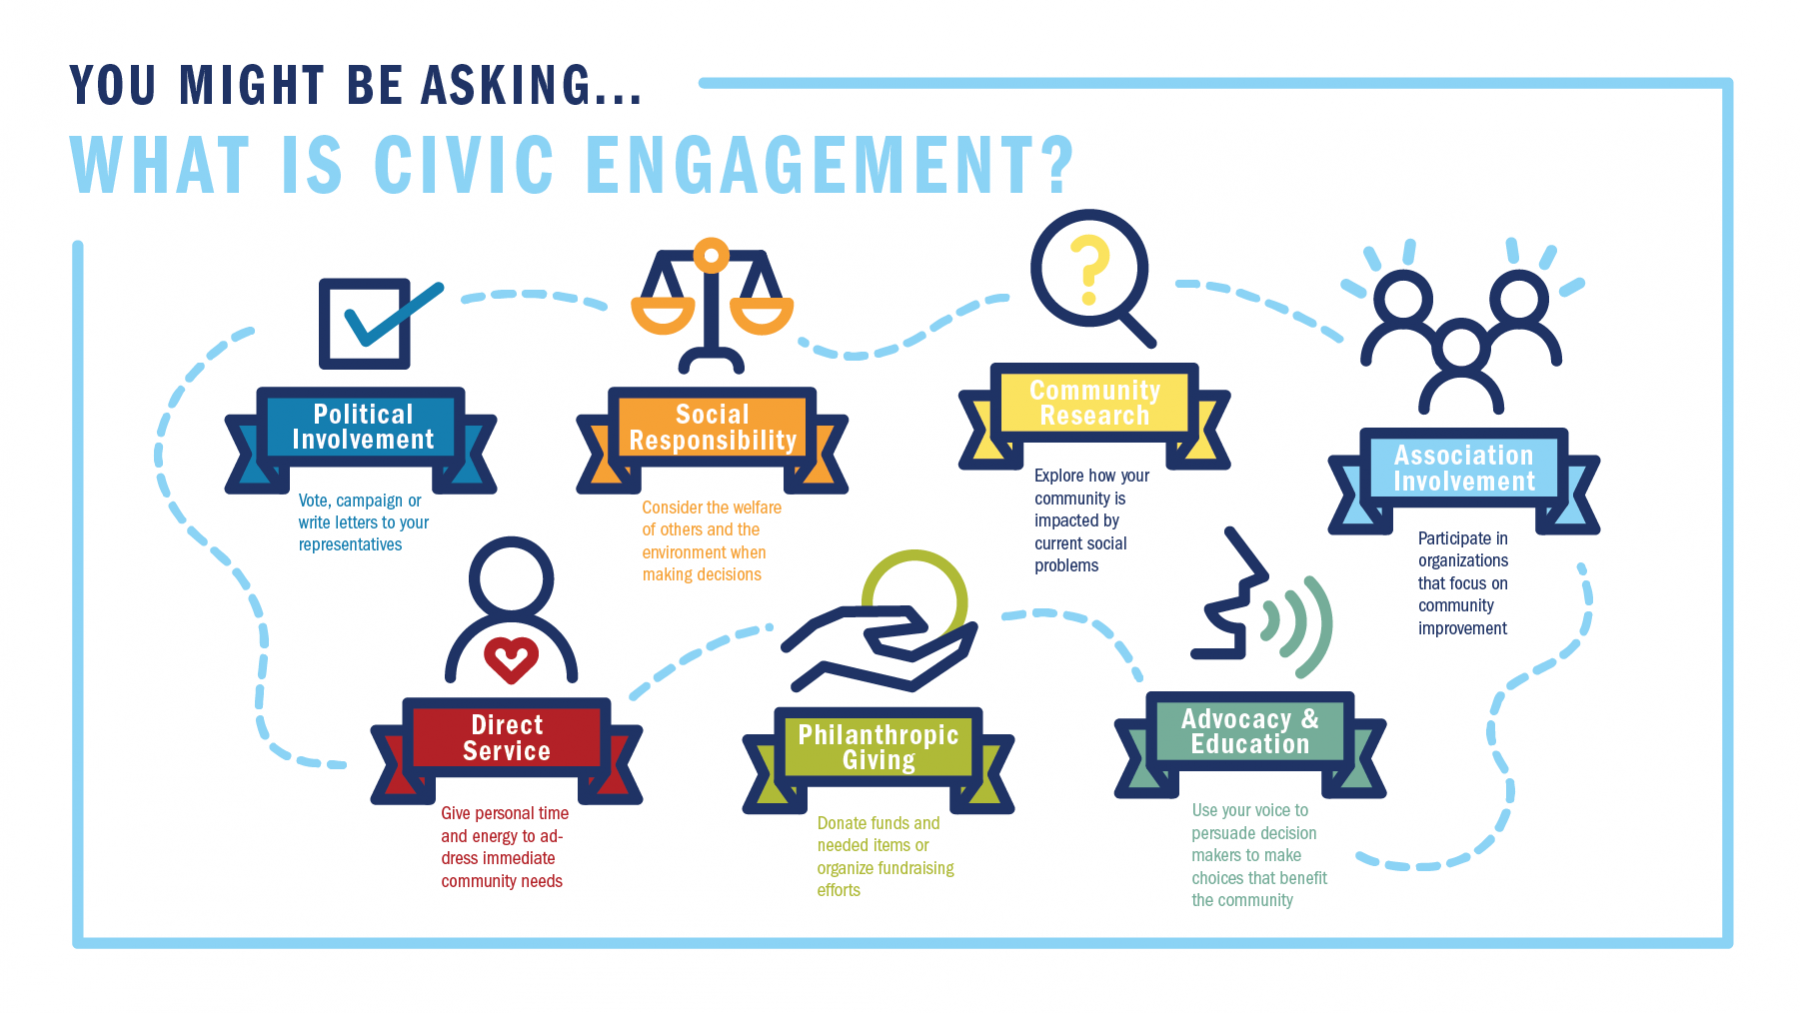 What is civic engagement? Political involvement, social responsibility, community research, association involvement, direct service, philanthropic giving, advocacy and education